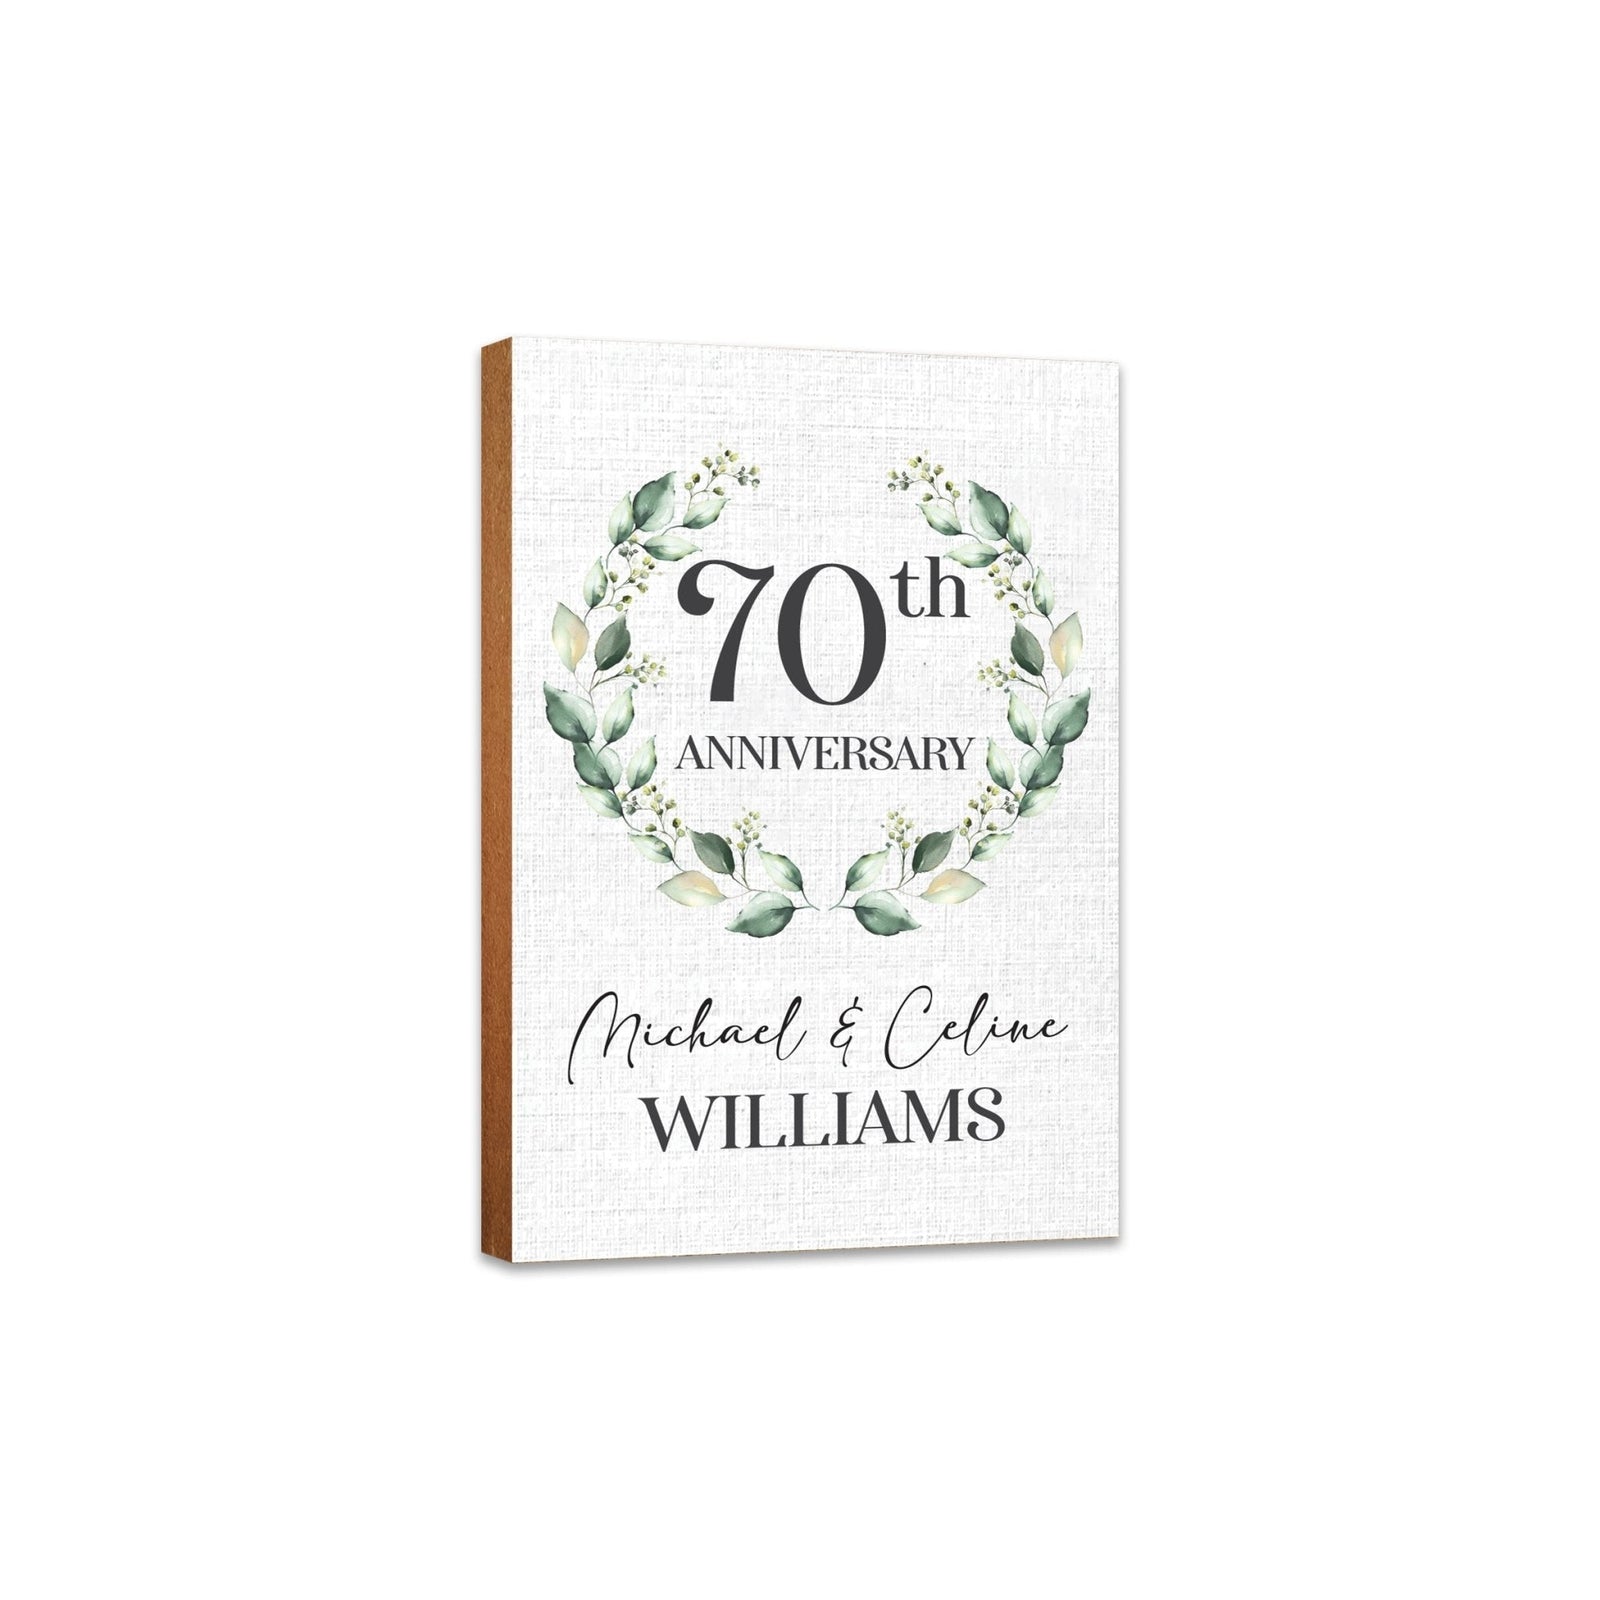 Personalized 70th Wedding Anniversary Wooden Shelf Décor and Tabletop Signs Gifts for Couples - LifeSong Milestones